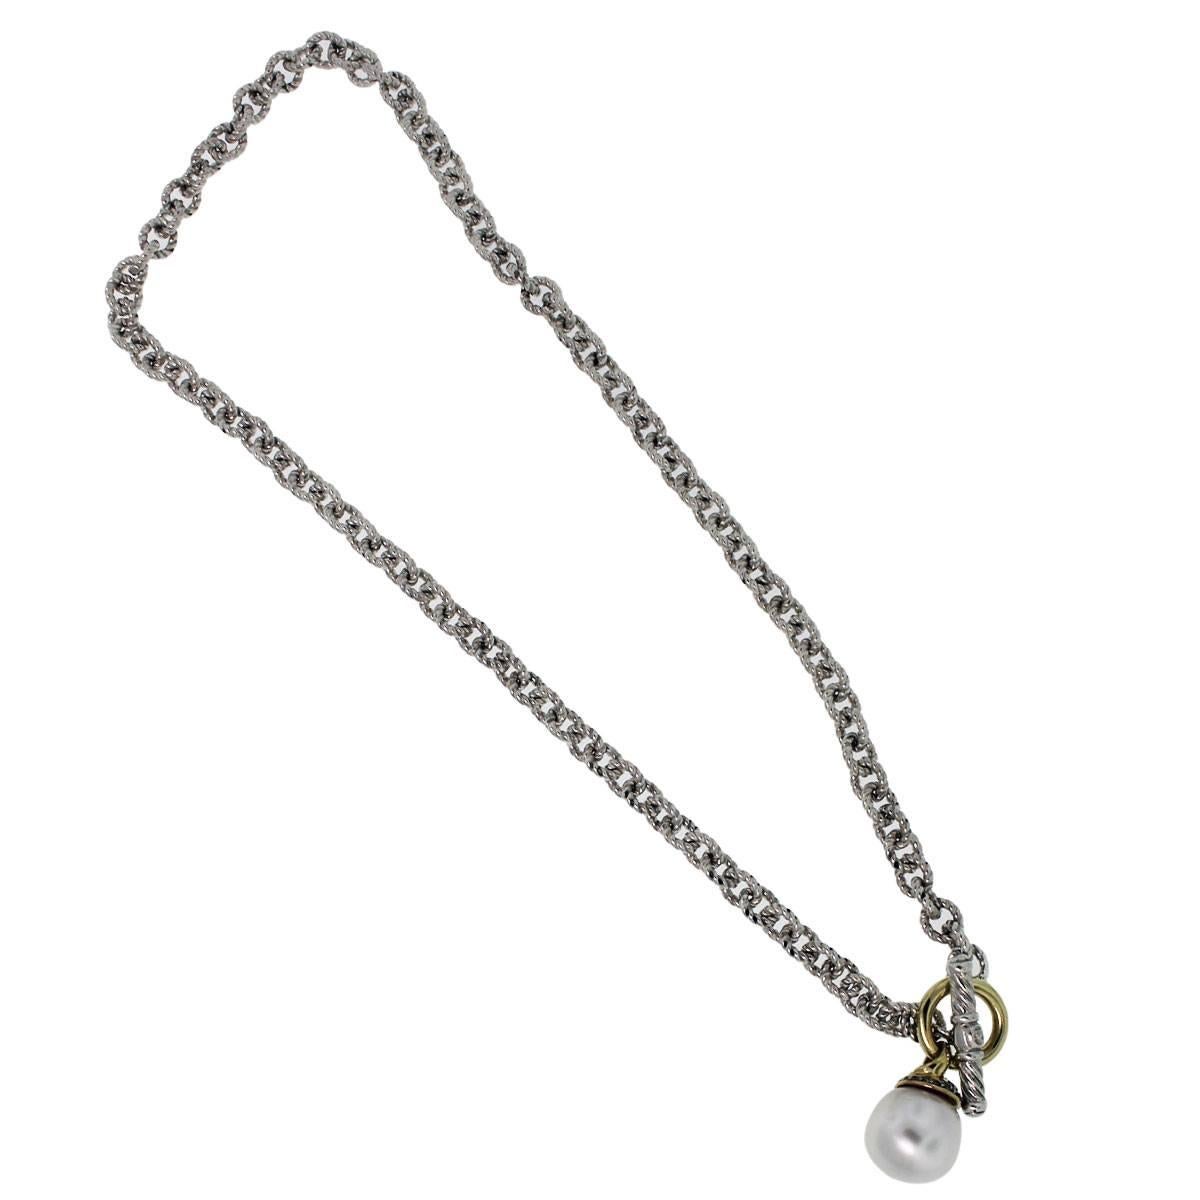 Designe: David Yurman
Style: Sterling silver & 18k Yellow Gold Pearl Drop Necklace
Material: Sterling Silver and 18K Yellow Gold
Necklace Length: 16.75